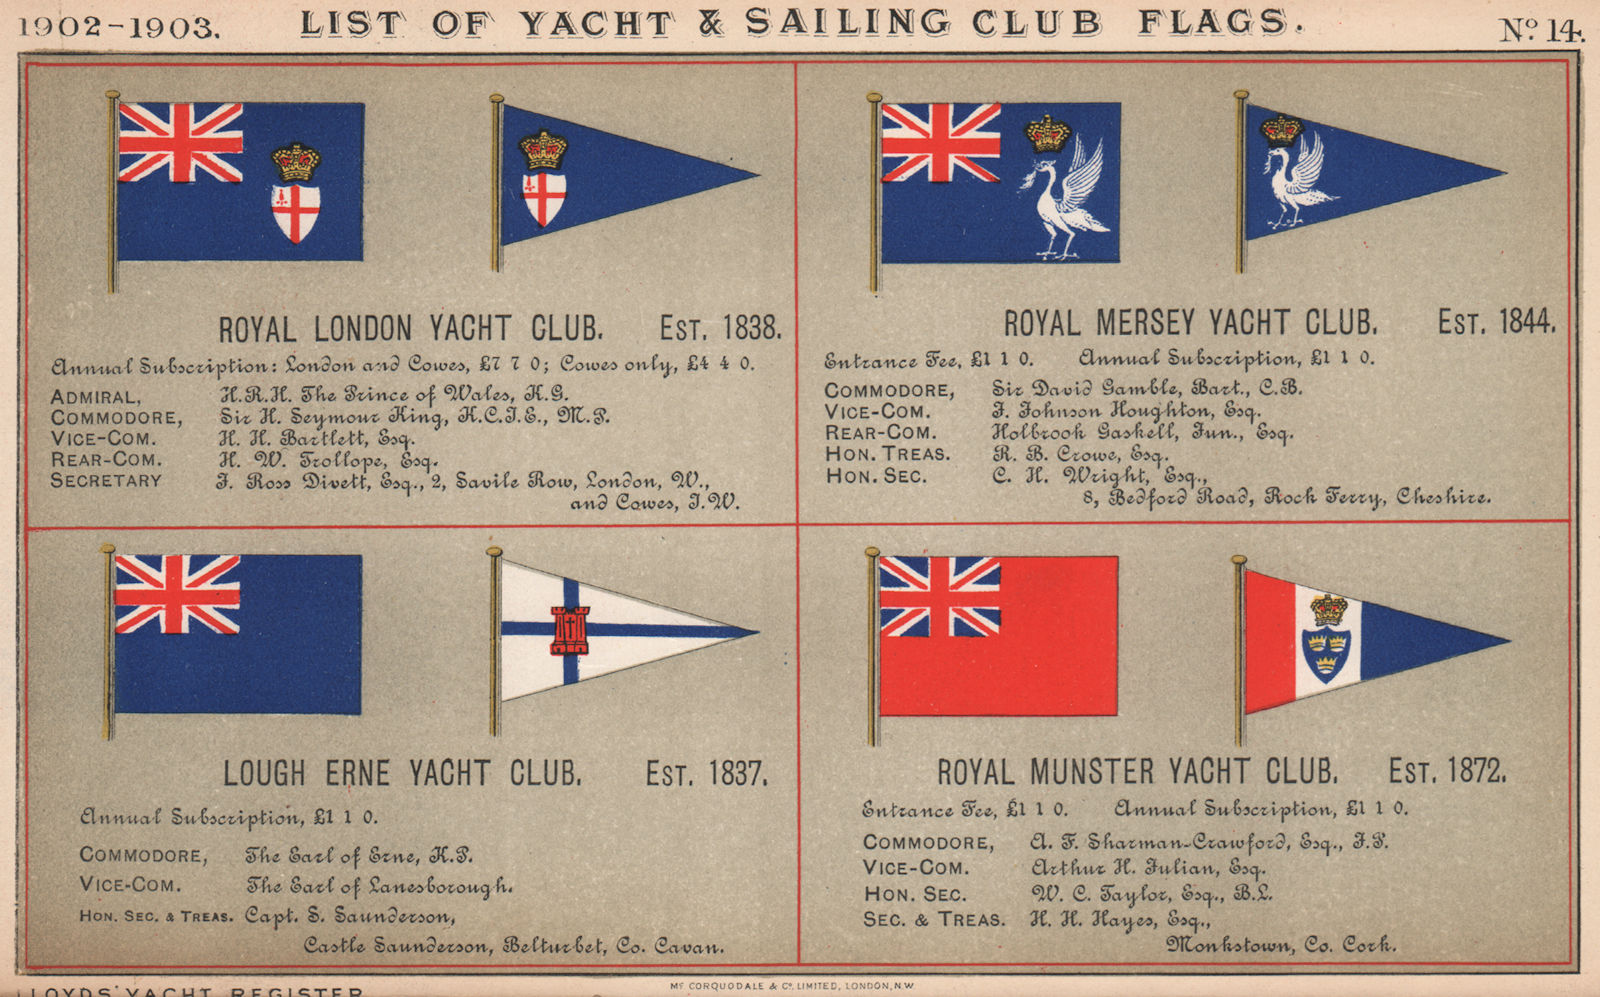 Associate Product ROYAL YACHT & SAILING CLUB FLAGS. London. Mersey. Lough Erne. Munster 1902